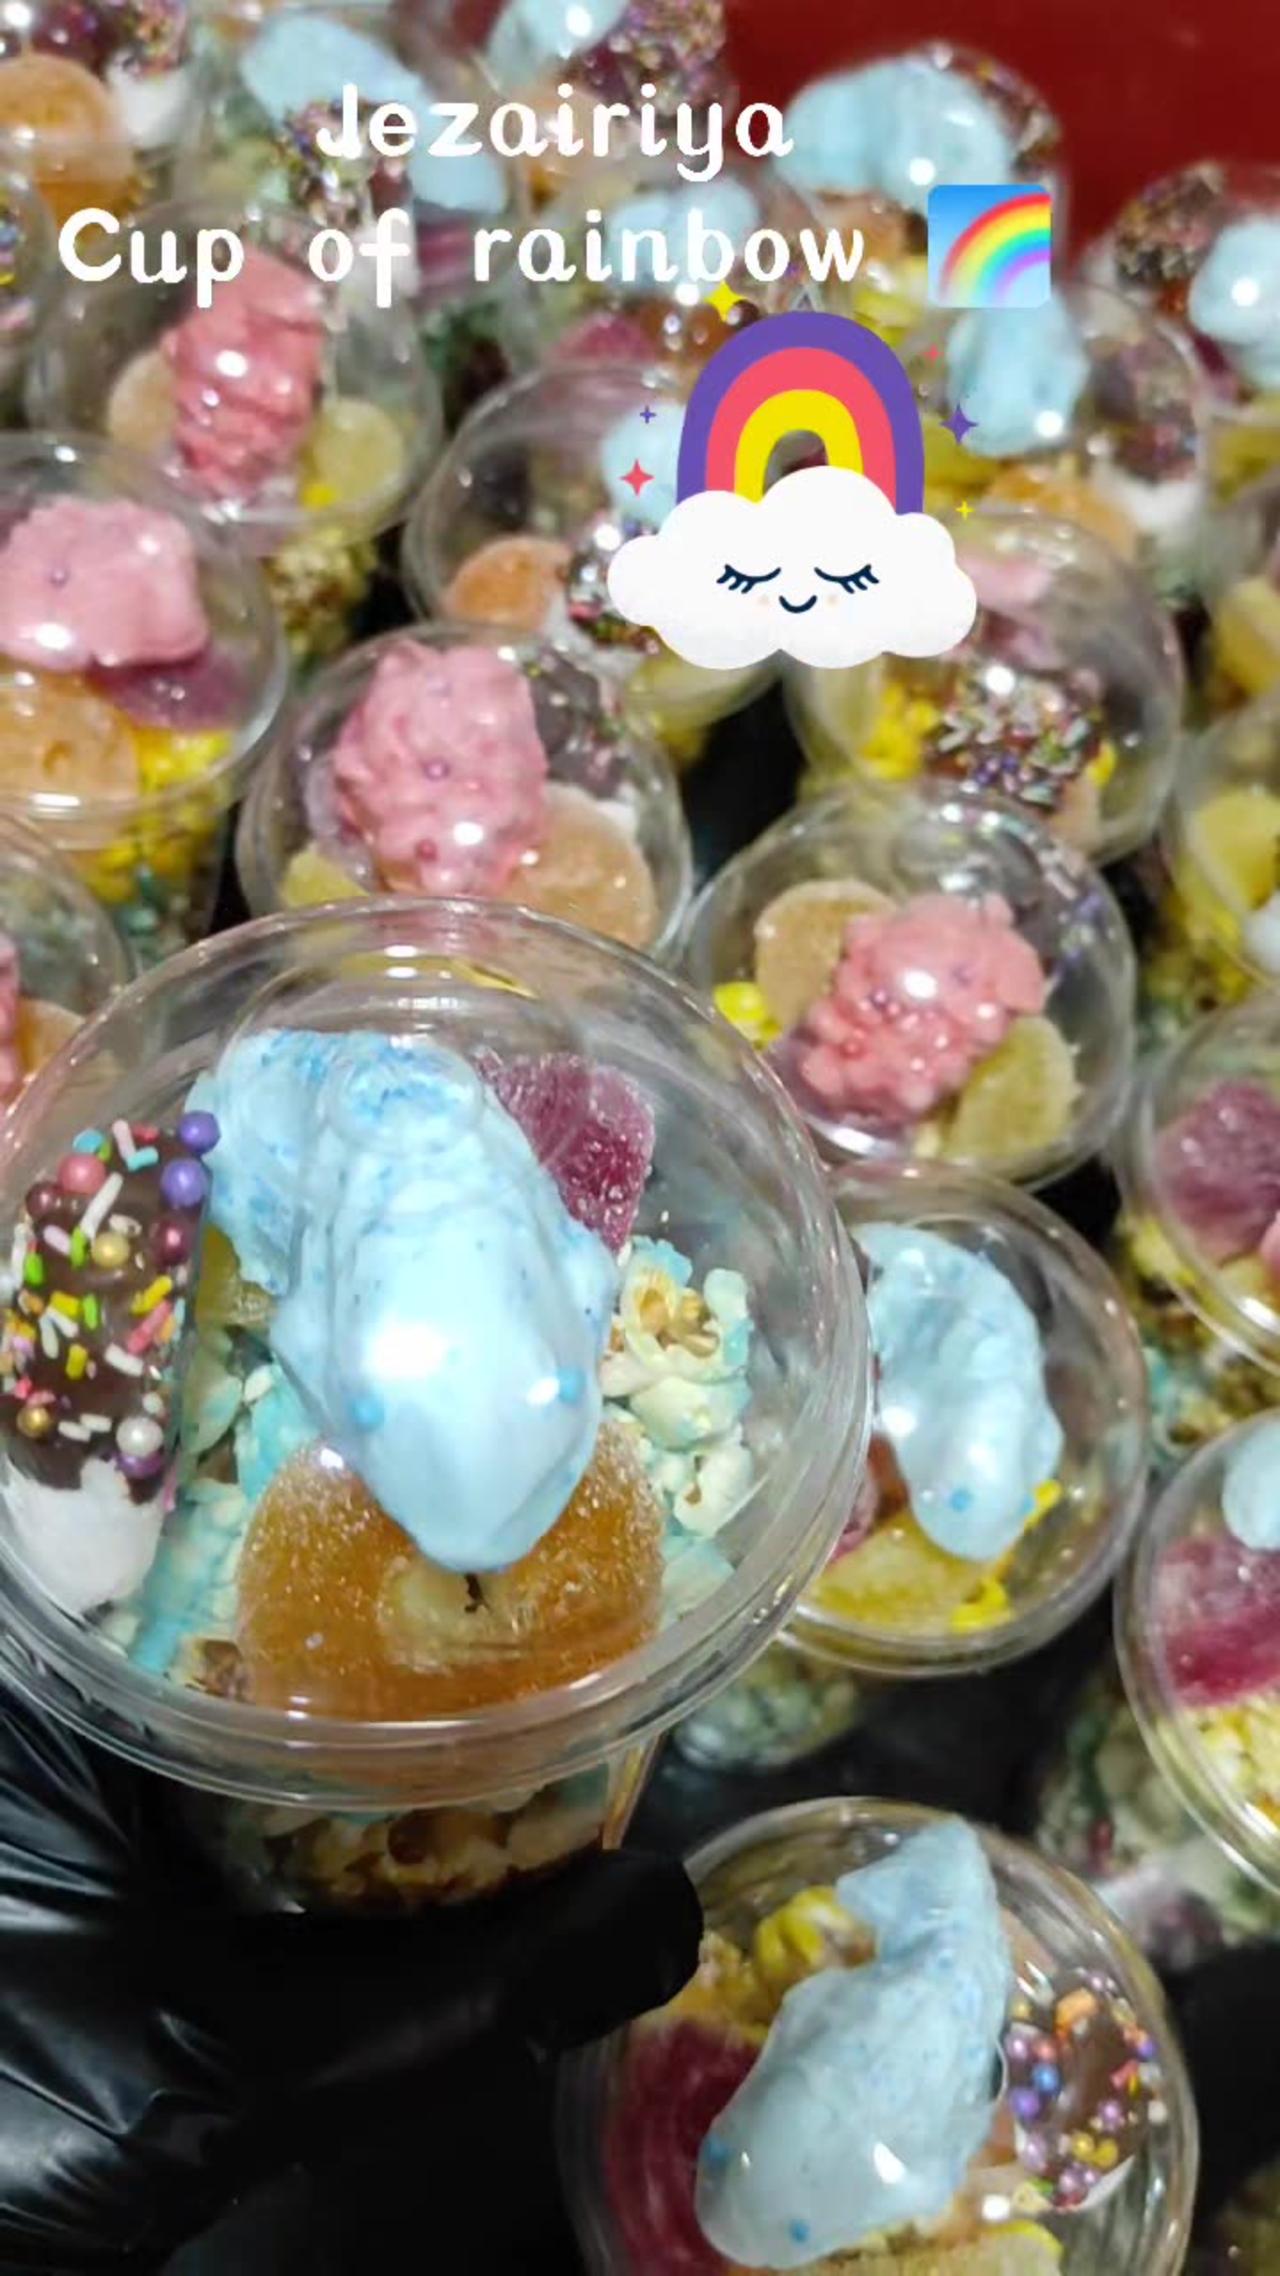 Rainbow cup of sweets and candies